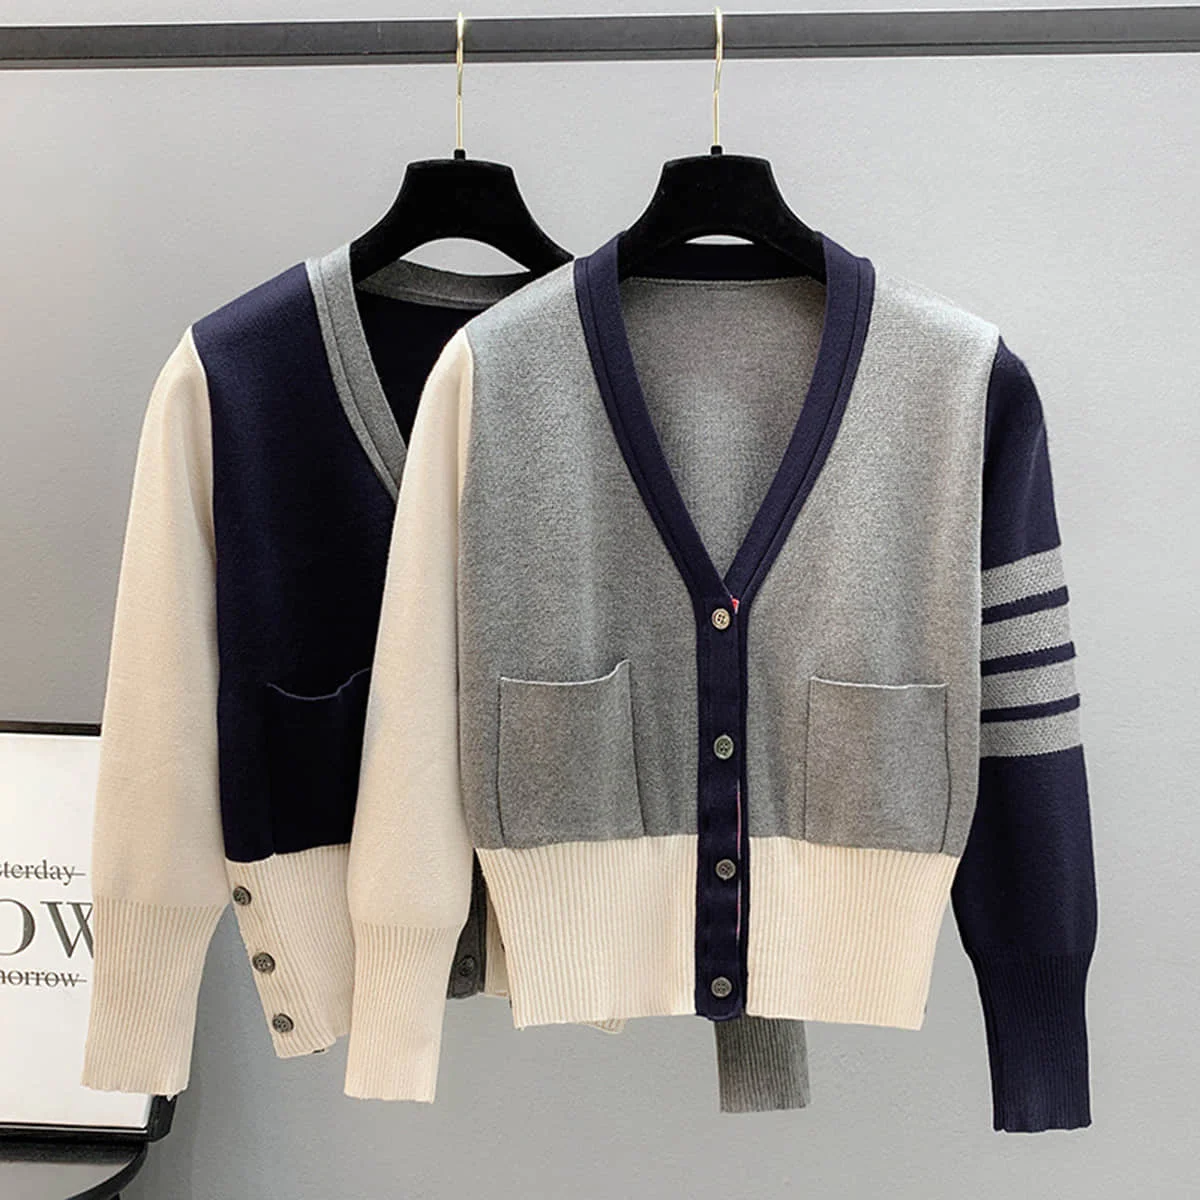 

Womens Cardigan TB Fashion Luxury Brand Thom Sweaters Slim Fit V-Neck Striped Cardigans Striped Cotton Casual Coat England Style